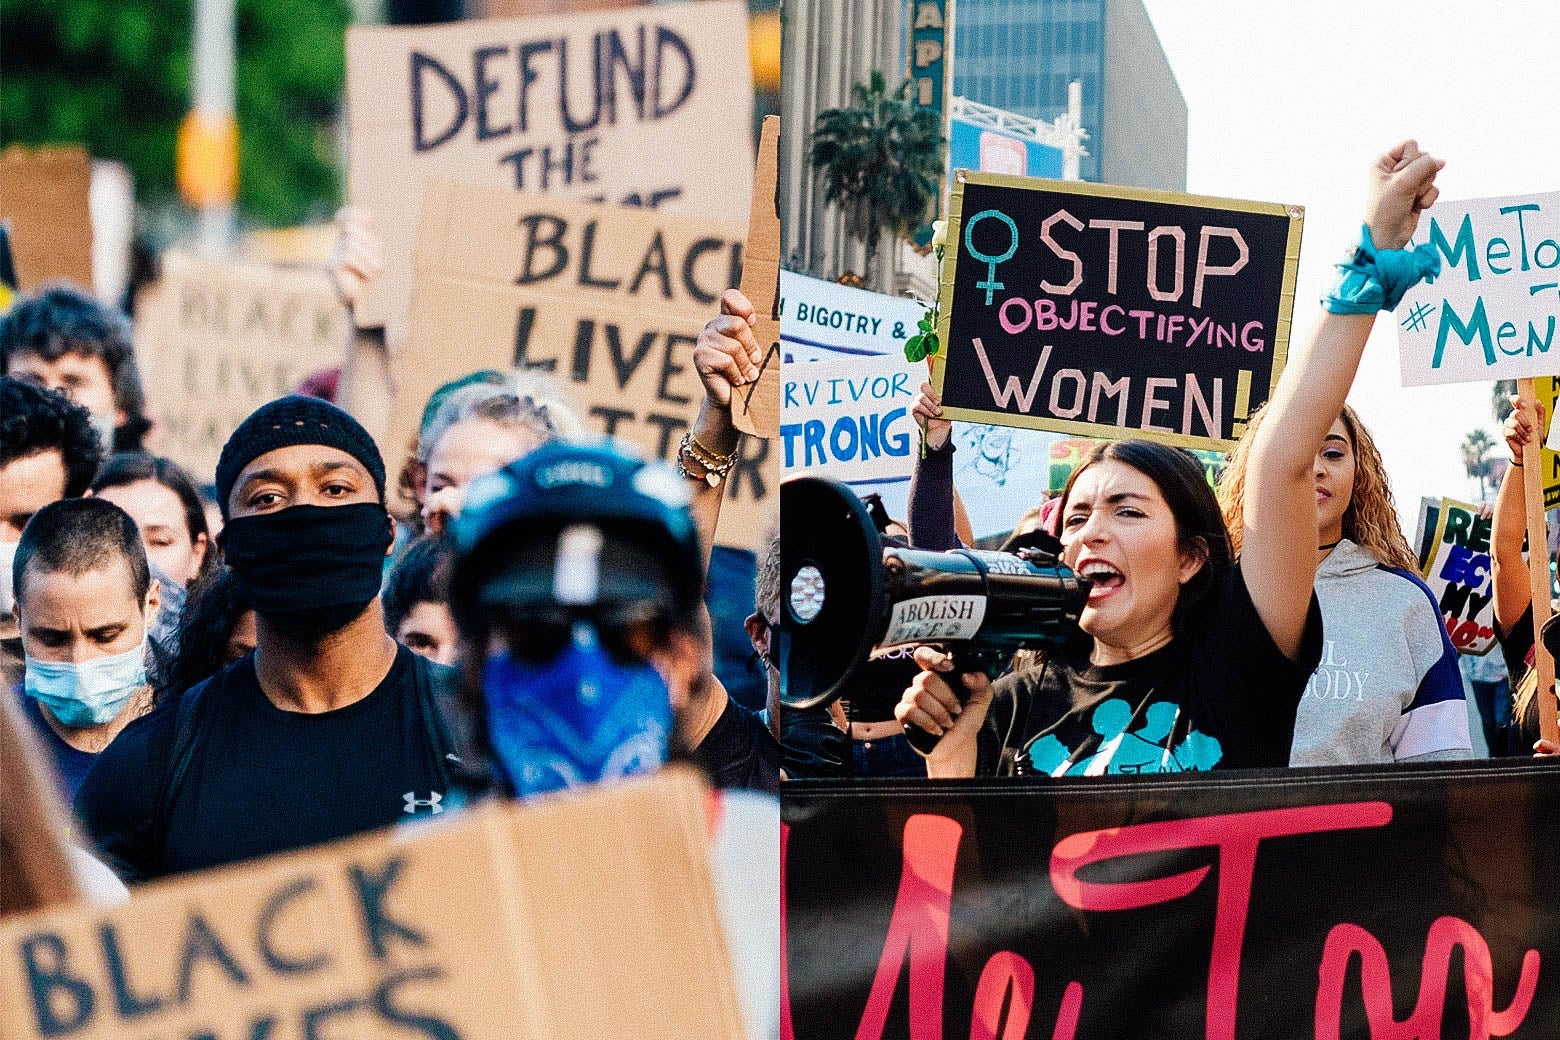 Left: Black Lives Matter protesters. Right: Me Too protesters.